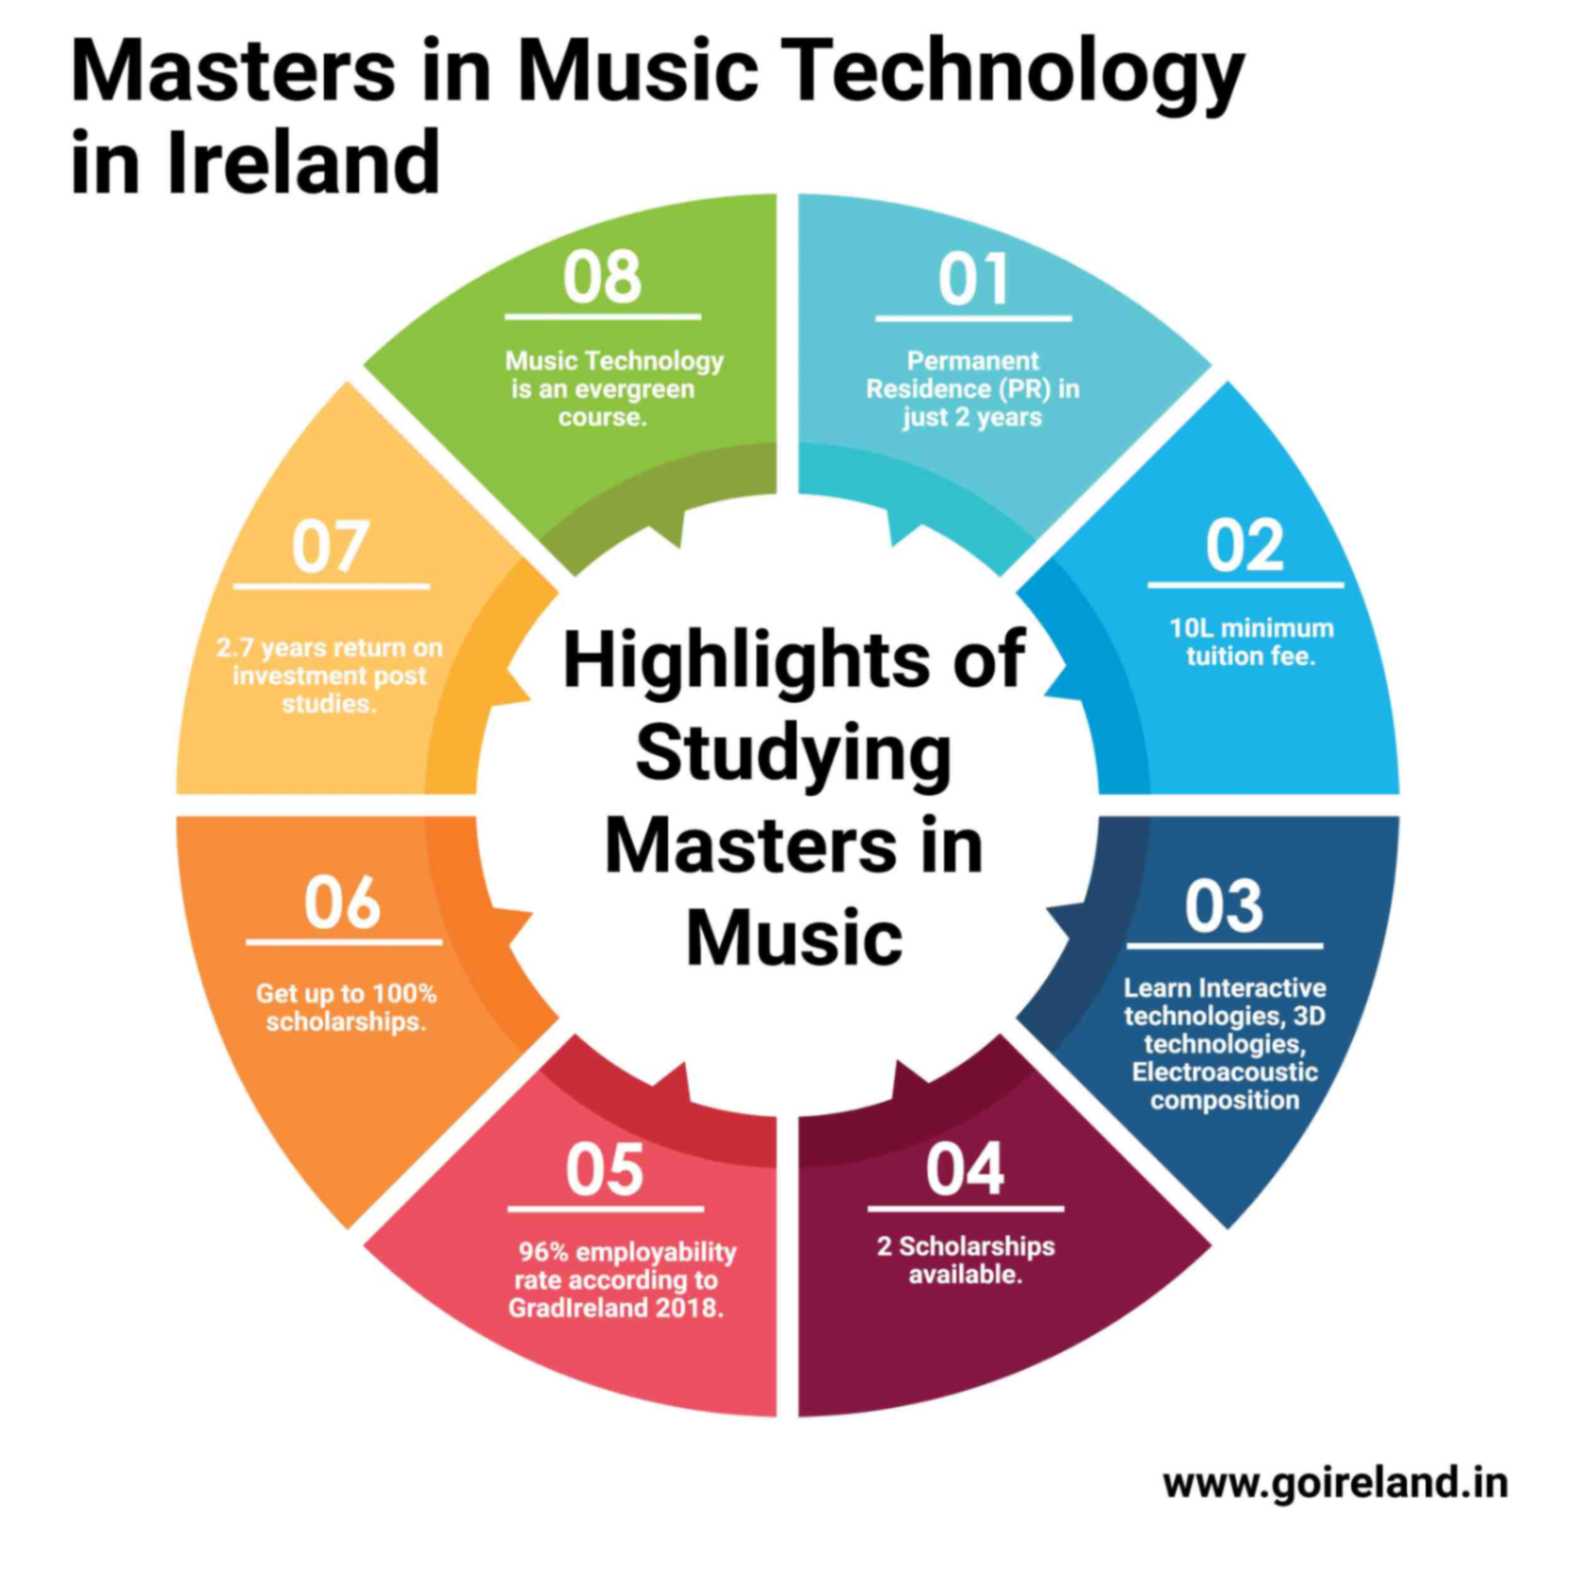 Masters in Music Technology in Ireland